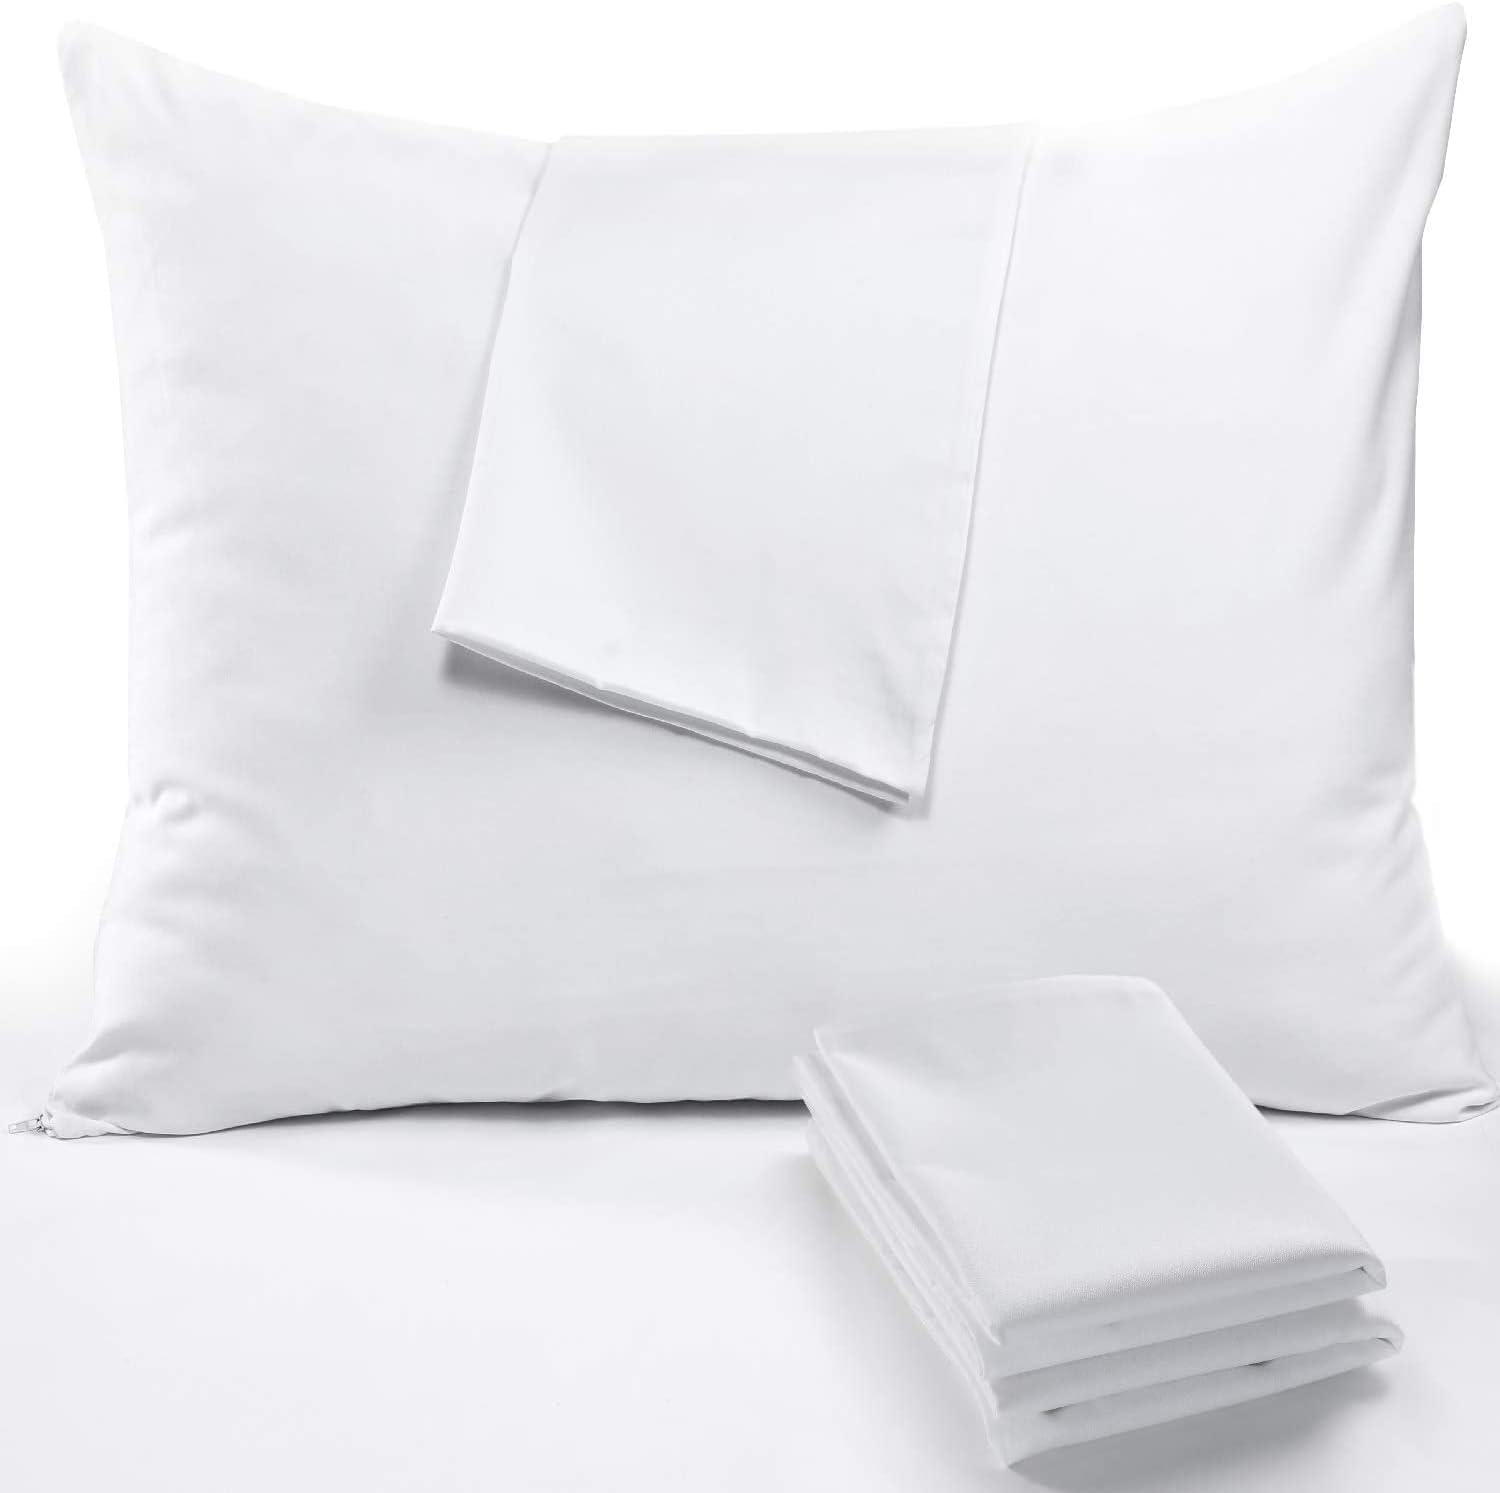 4 Pack Pillow Protectors Feather Proof Queen 20x30 Inches 3-4 Micron Pore Size Premium Cotton Sateen Blend Tight Weave Lab Tested Non Noisy Zip Covers Breathable Non Crinky